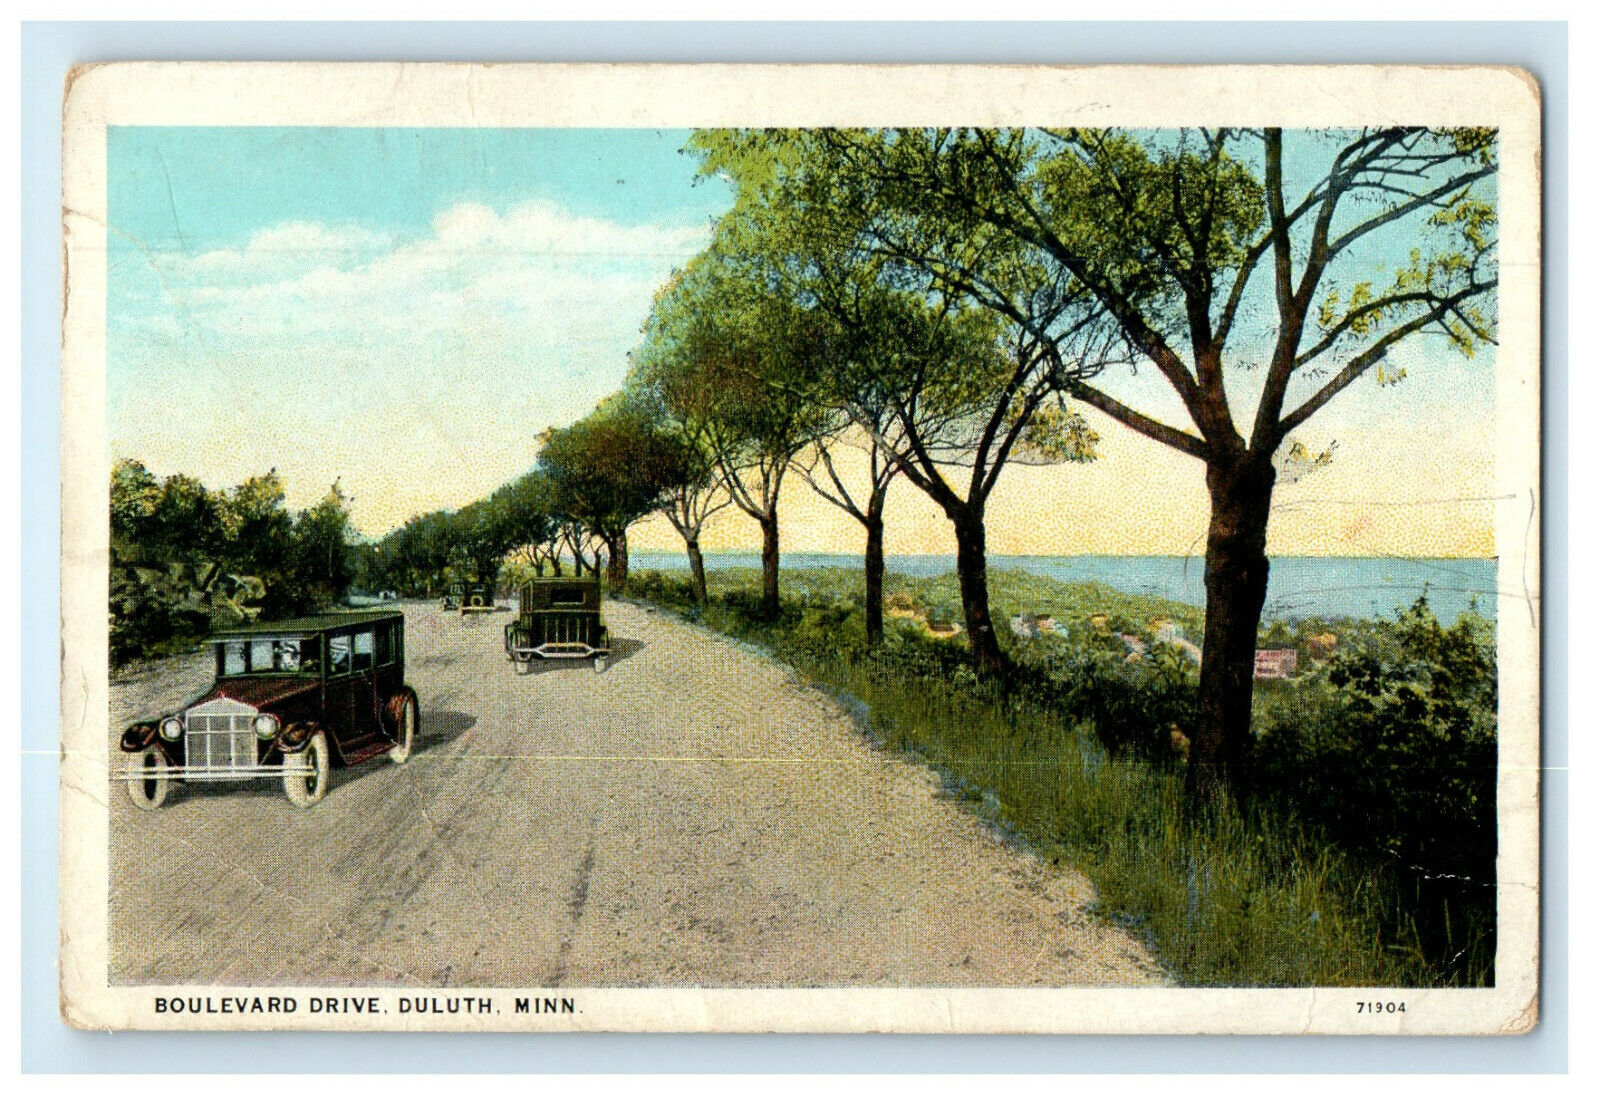 1939 Two Cars in Boulevard Drive Duluth Minnesota MN Vintage Postcard